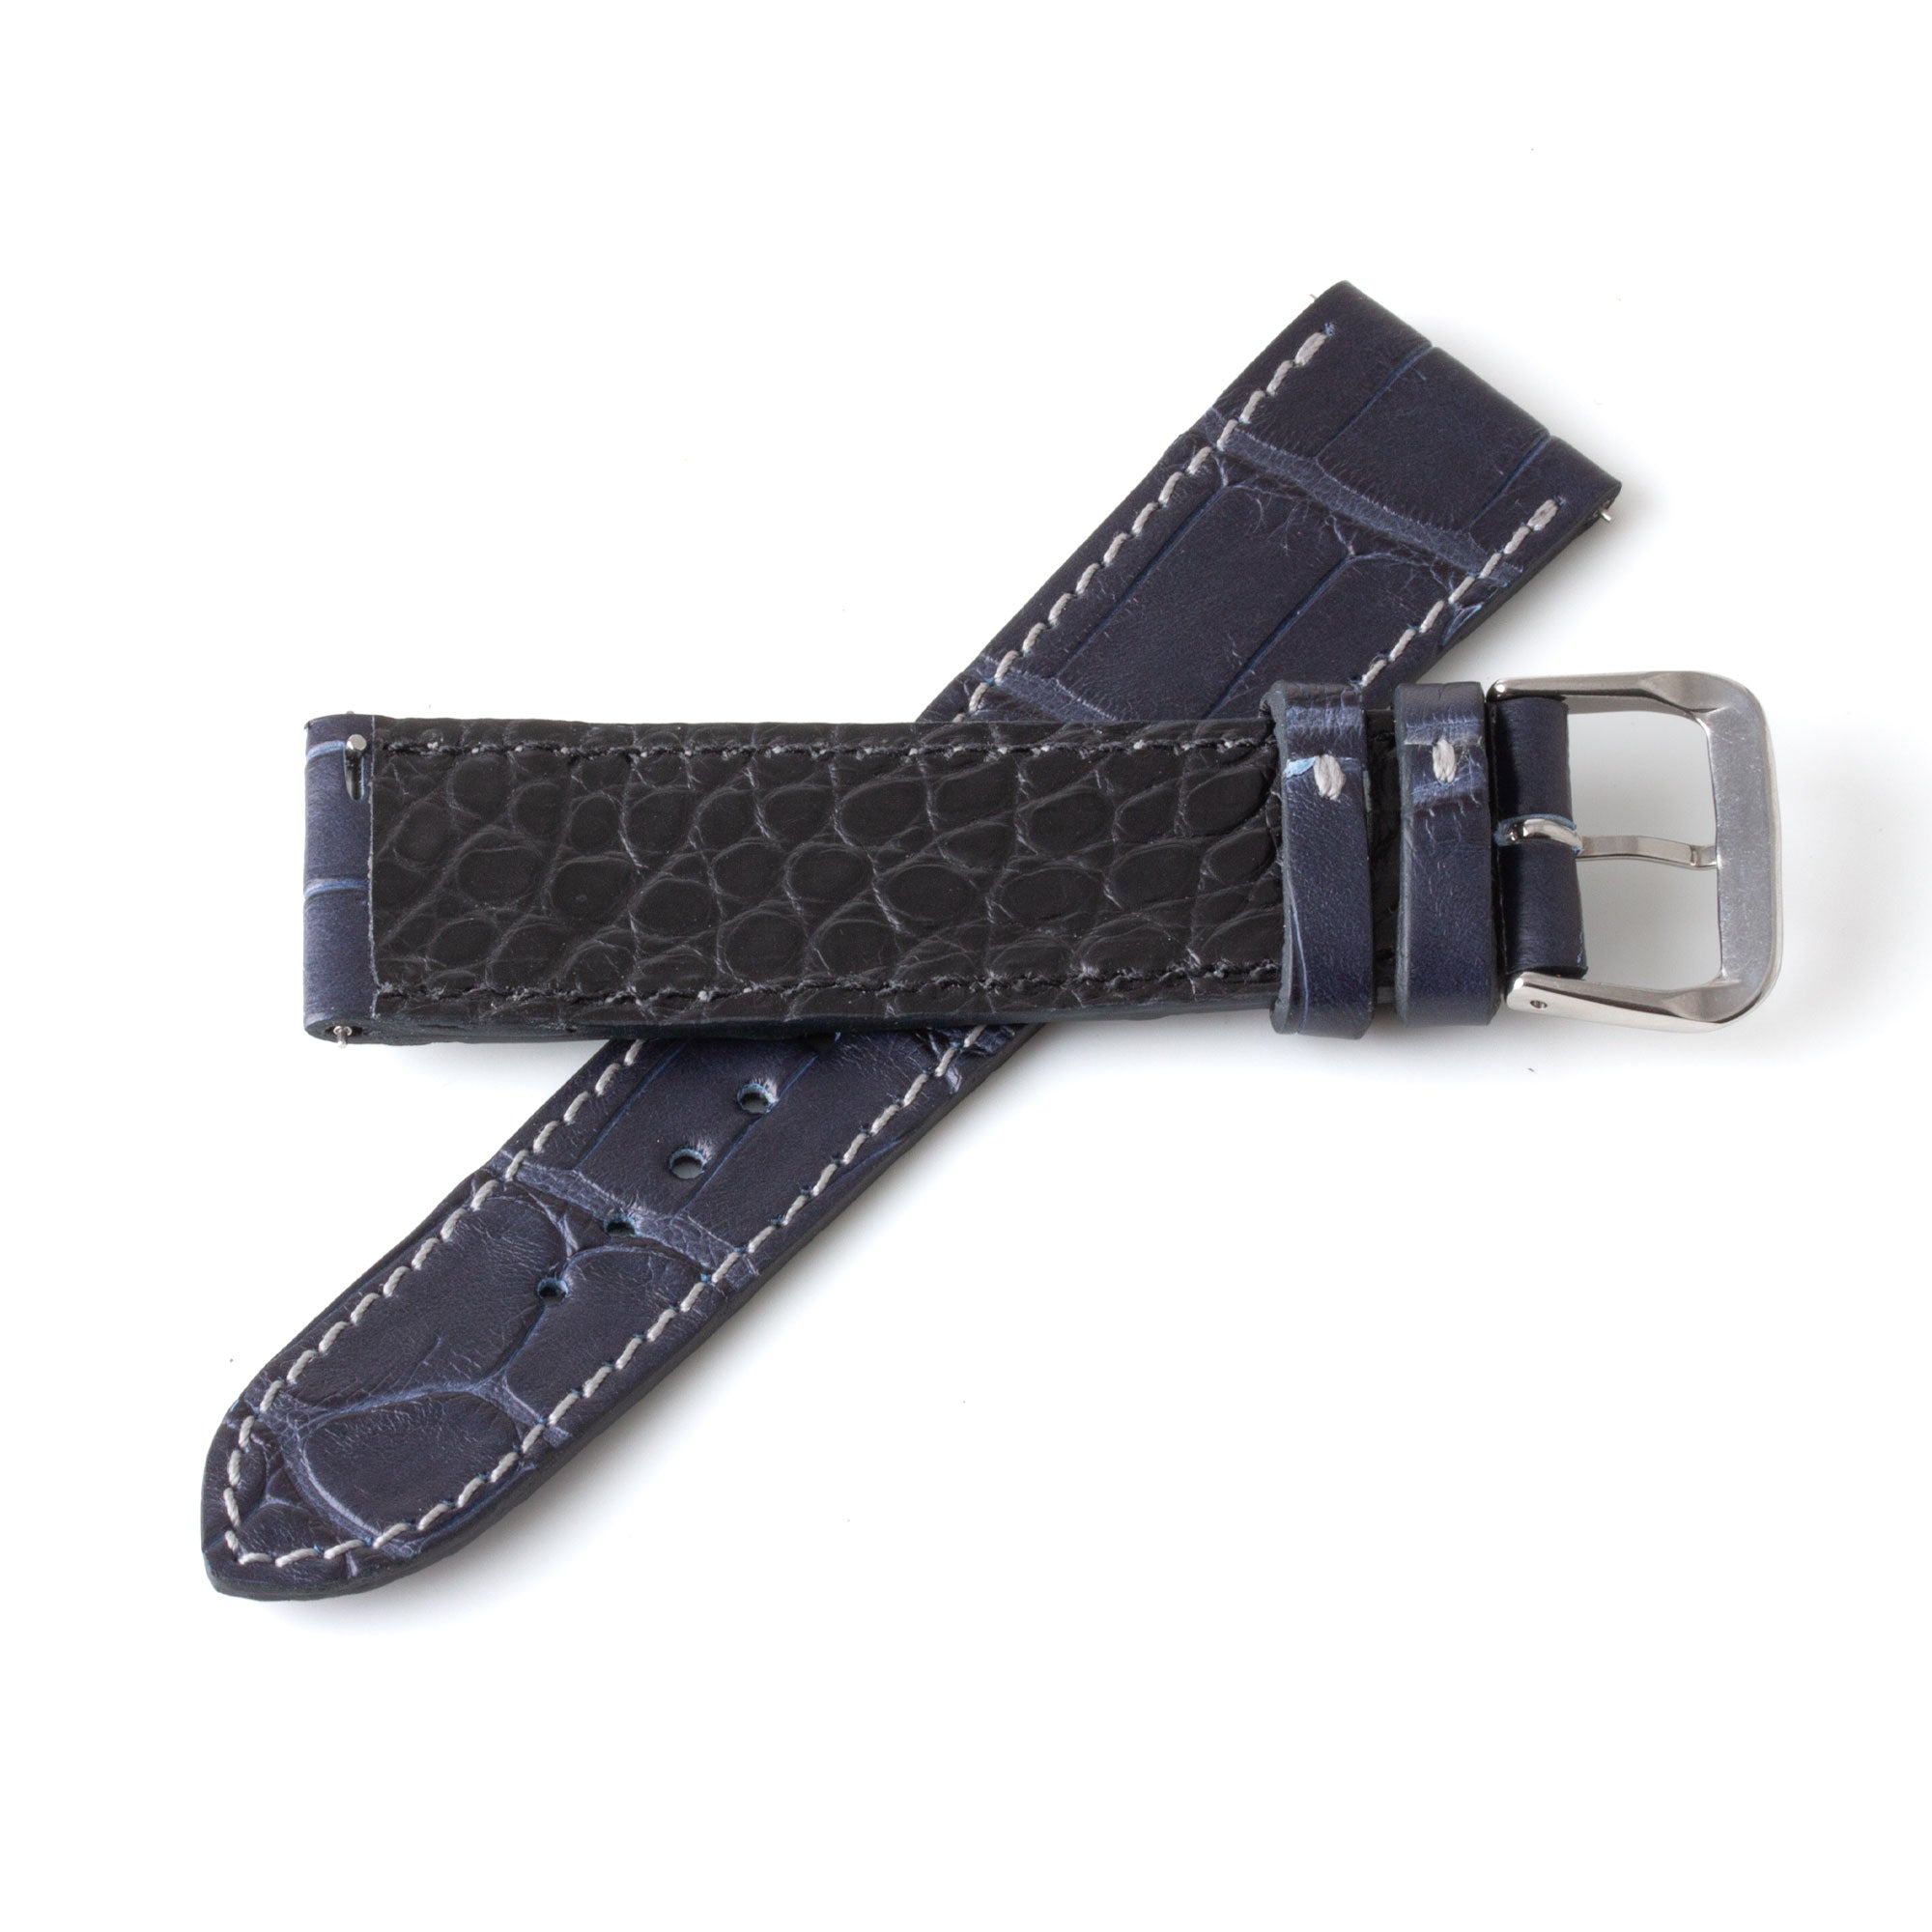 Alligator "Solo" leather watch band - 22mm width (0.87 inches) / Size M (n° 3)